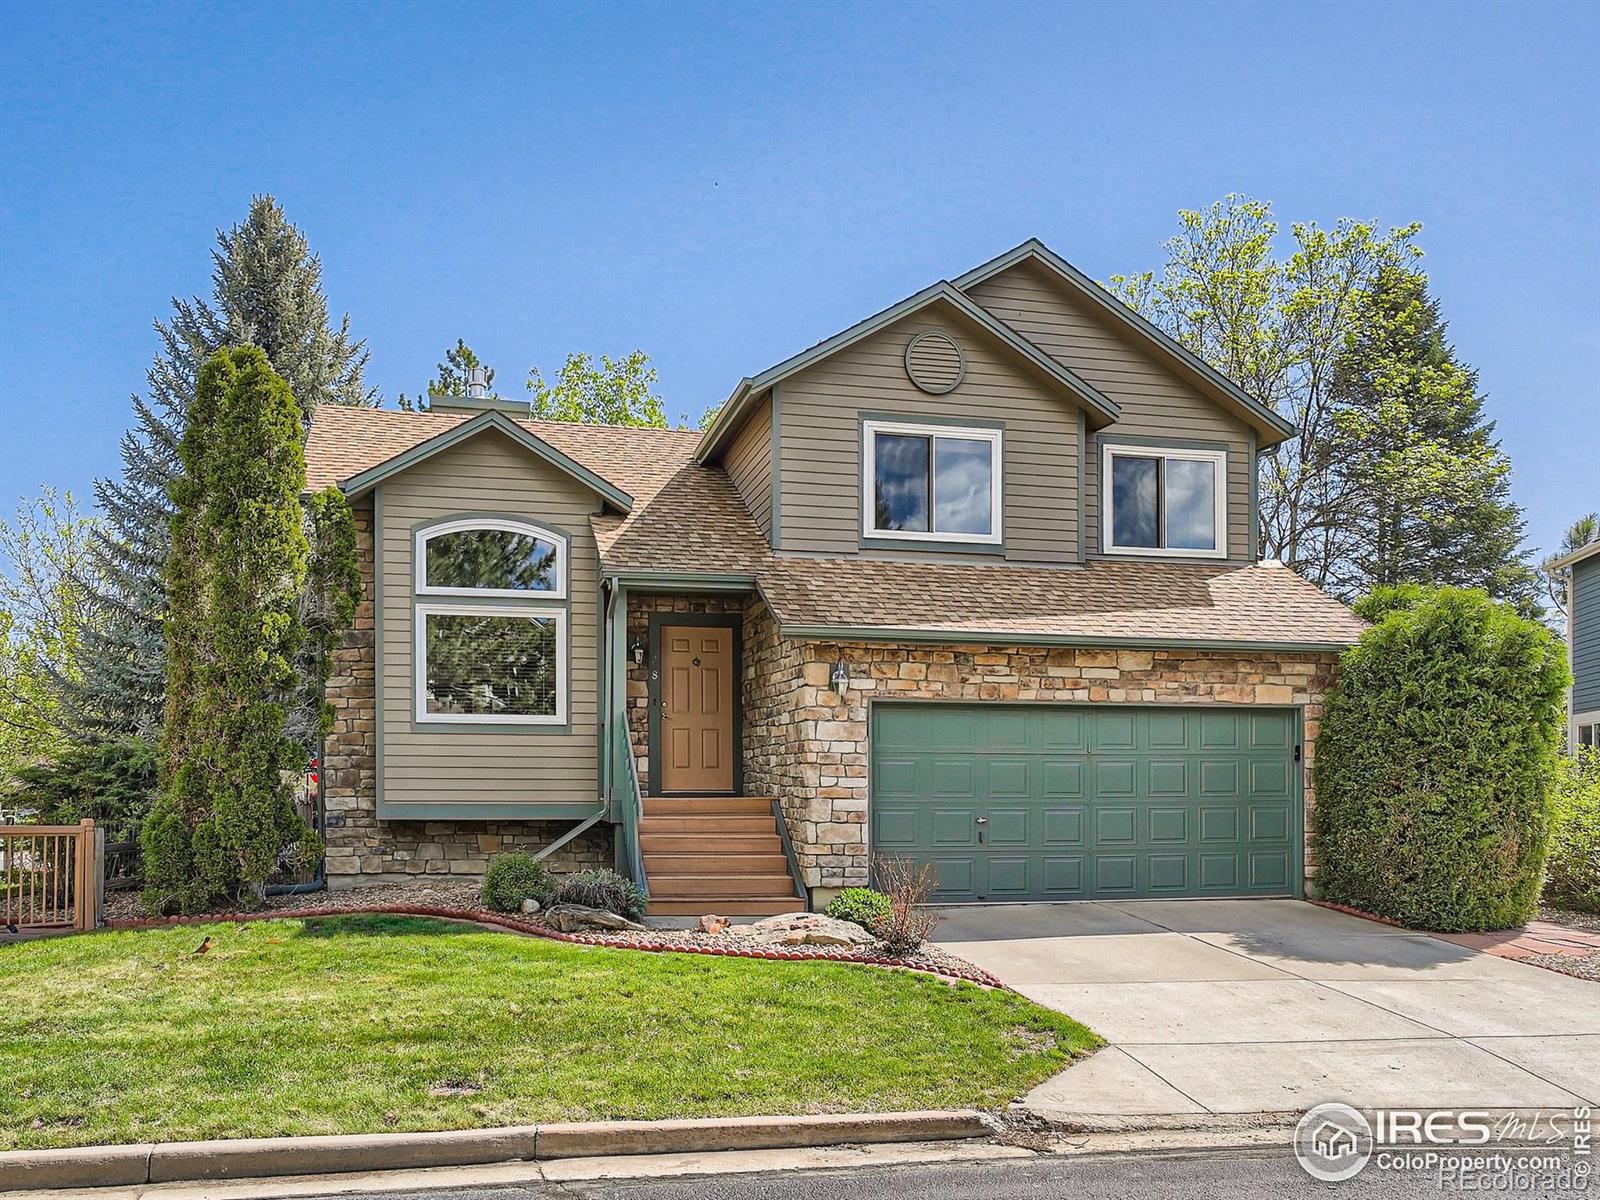 5458  glendale gulch circle, Boulder sold home. Closed on 2024-03-22 for $790,000.